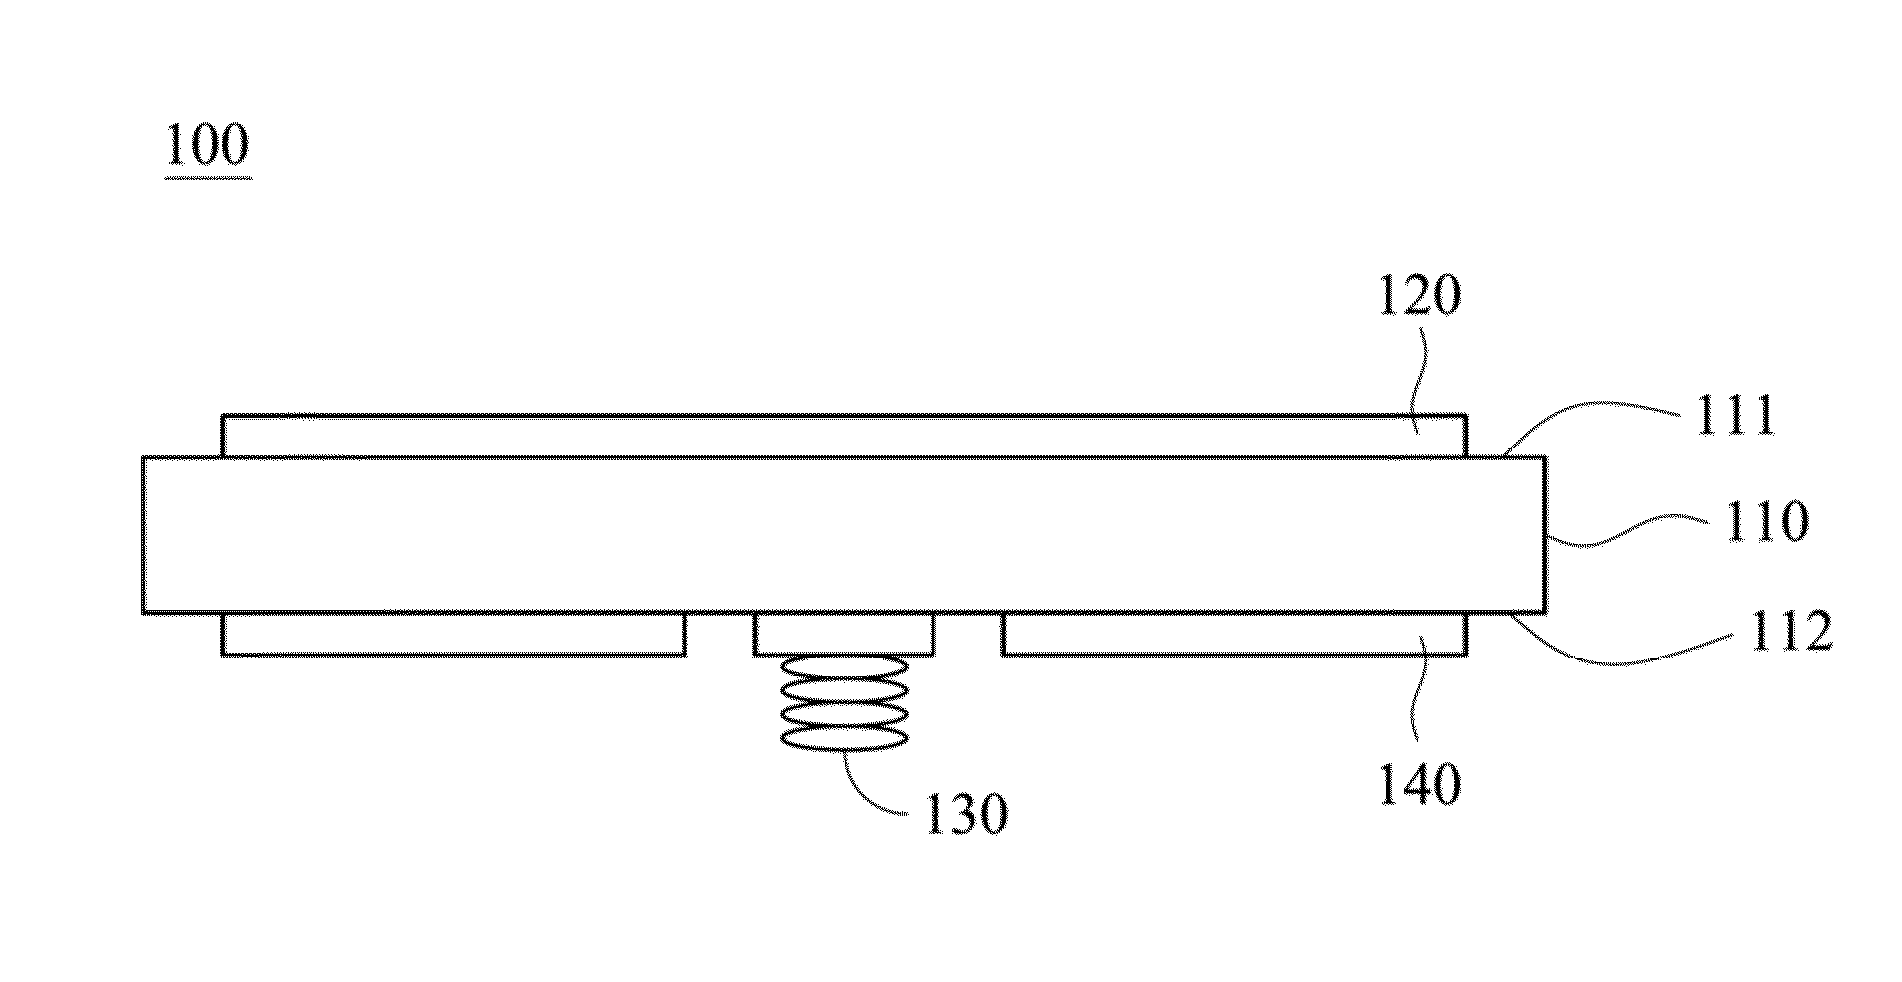 Microstrip antenna structure and microwave imaging system using the same